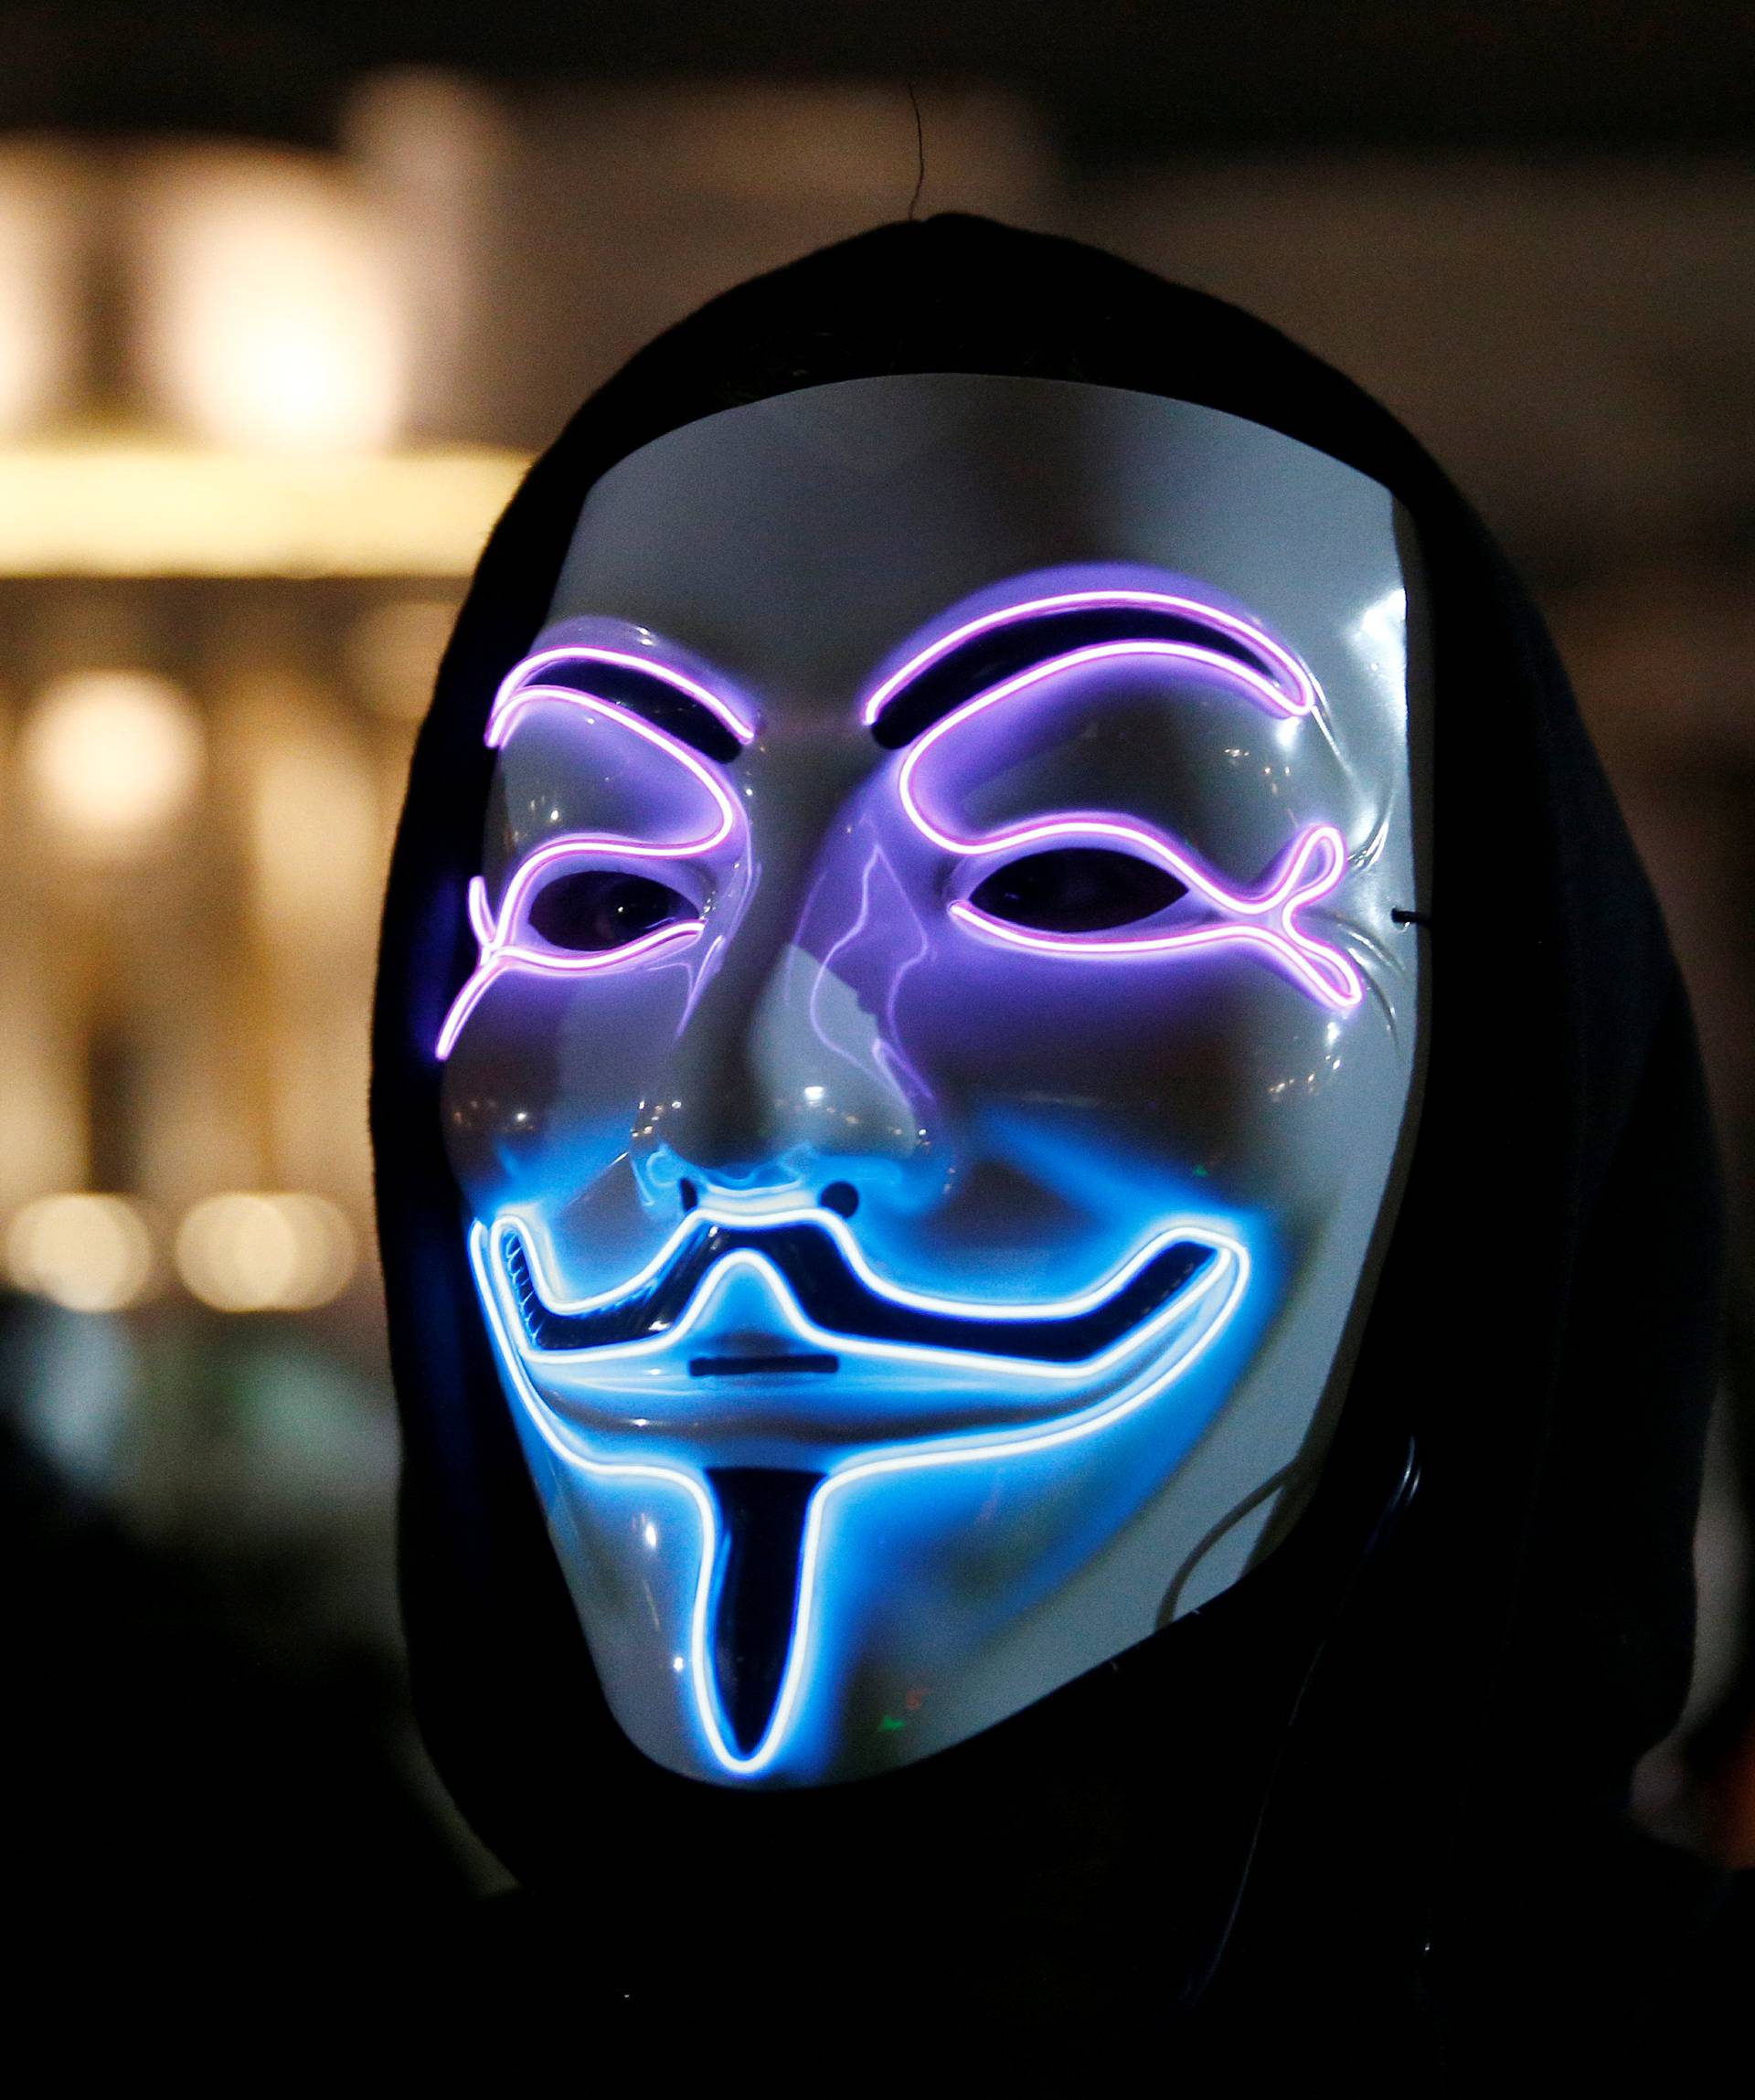 A mask wearing protester participates in the "Million Mask March" in London